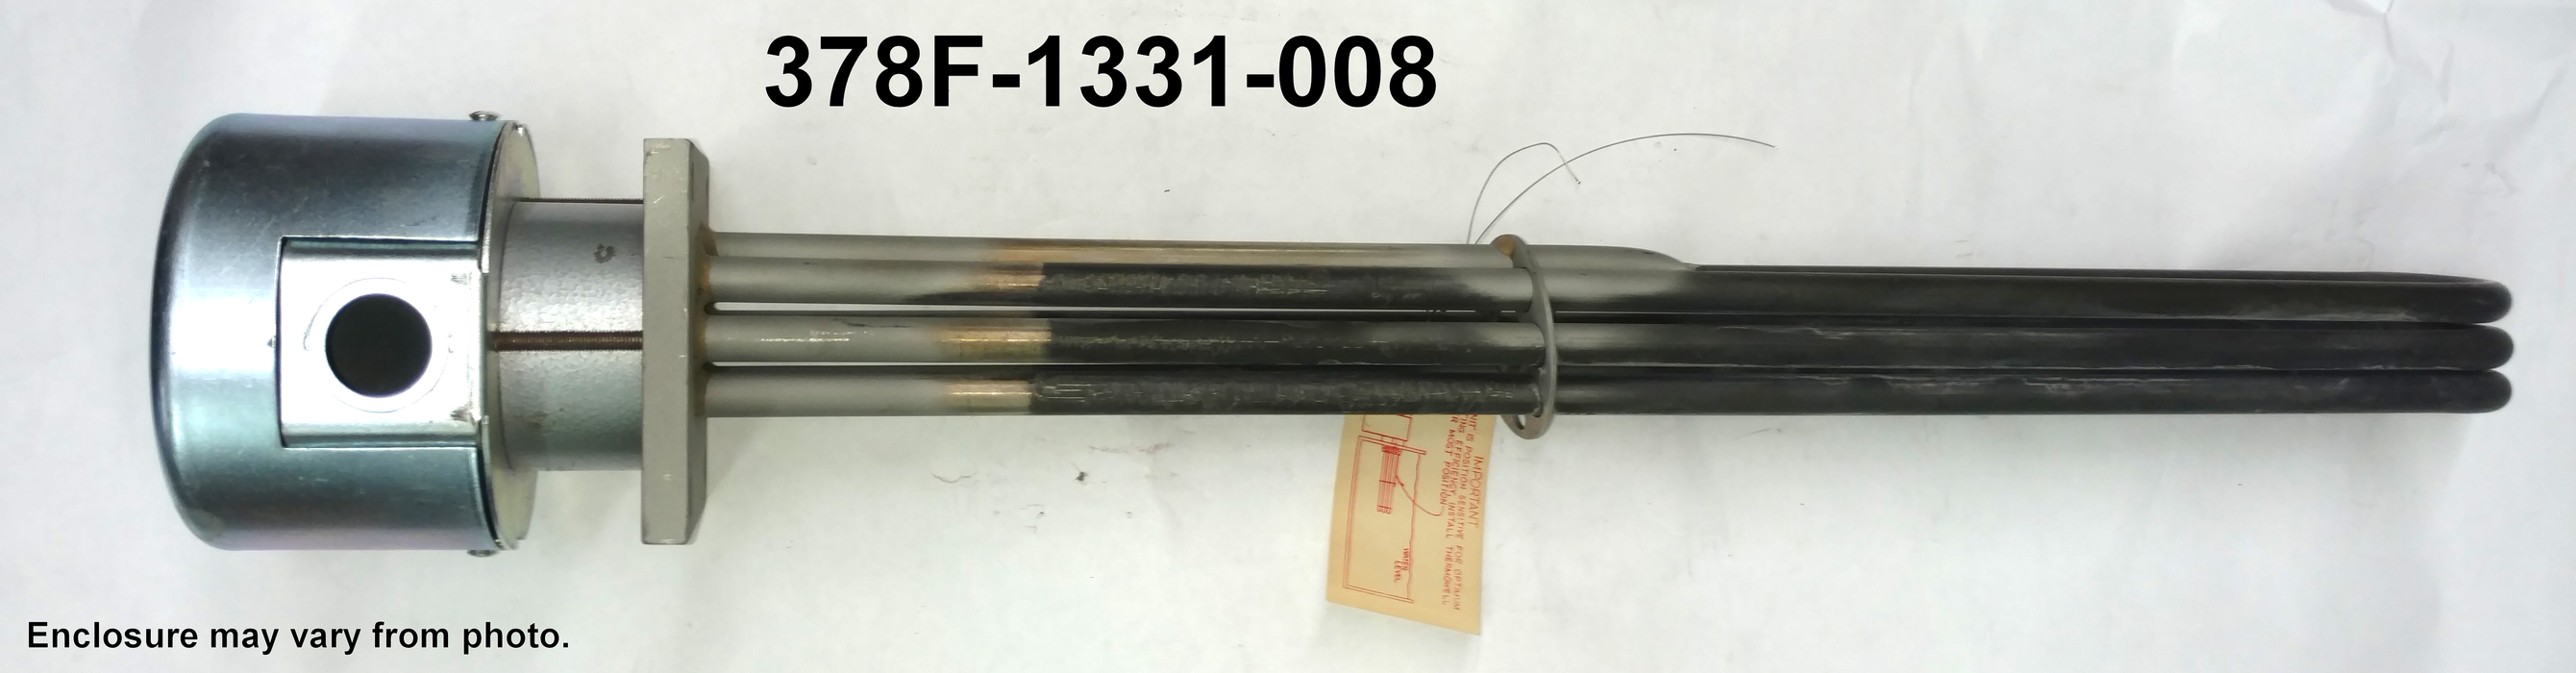 FA-5053 Hobart 5000W 480V 3-Phase, 13-5/8" Immersion Length Commercial Dishwasher Equivalent Replacement Element